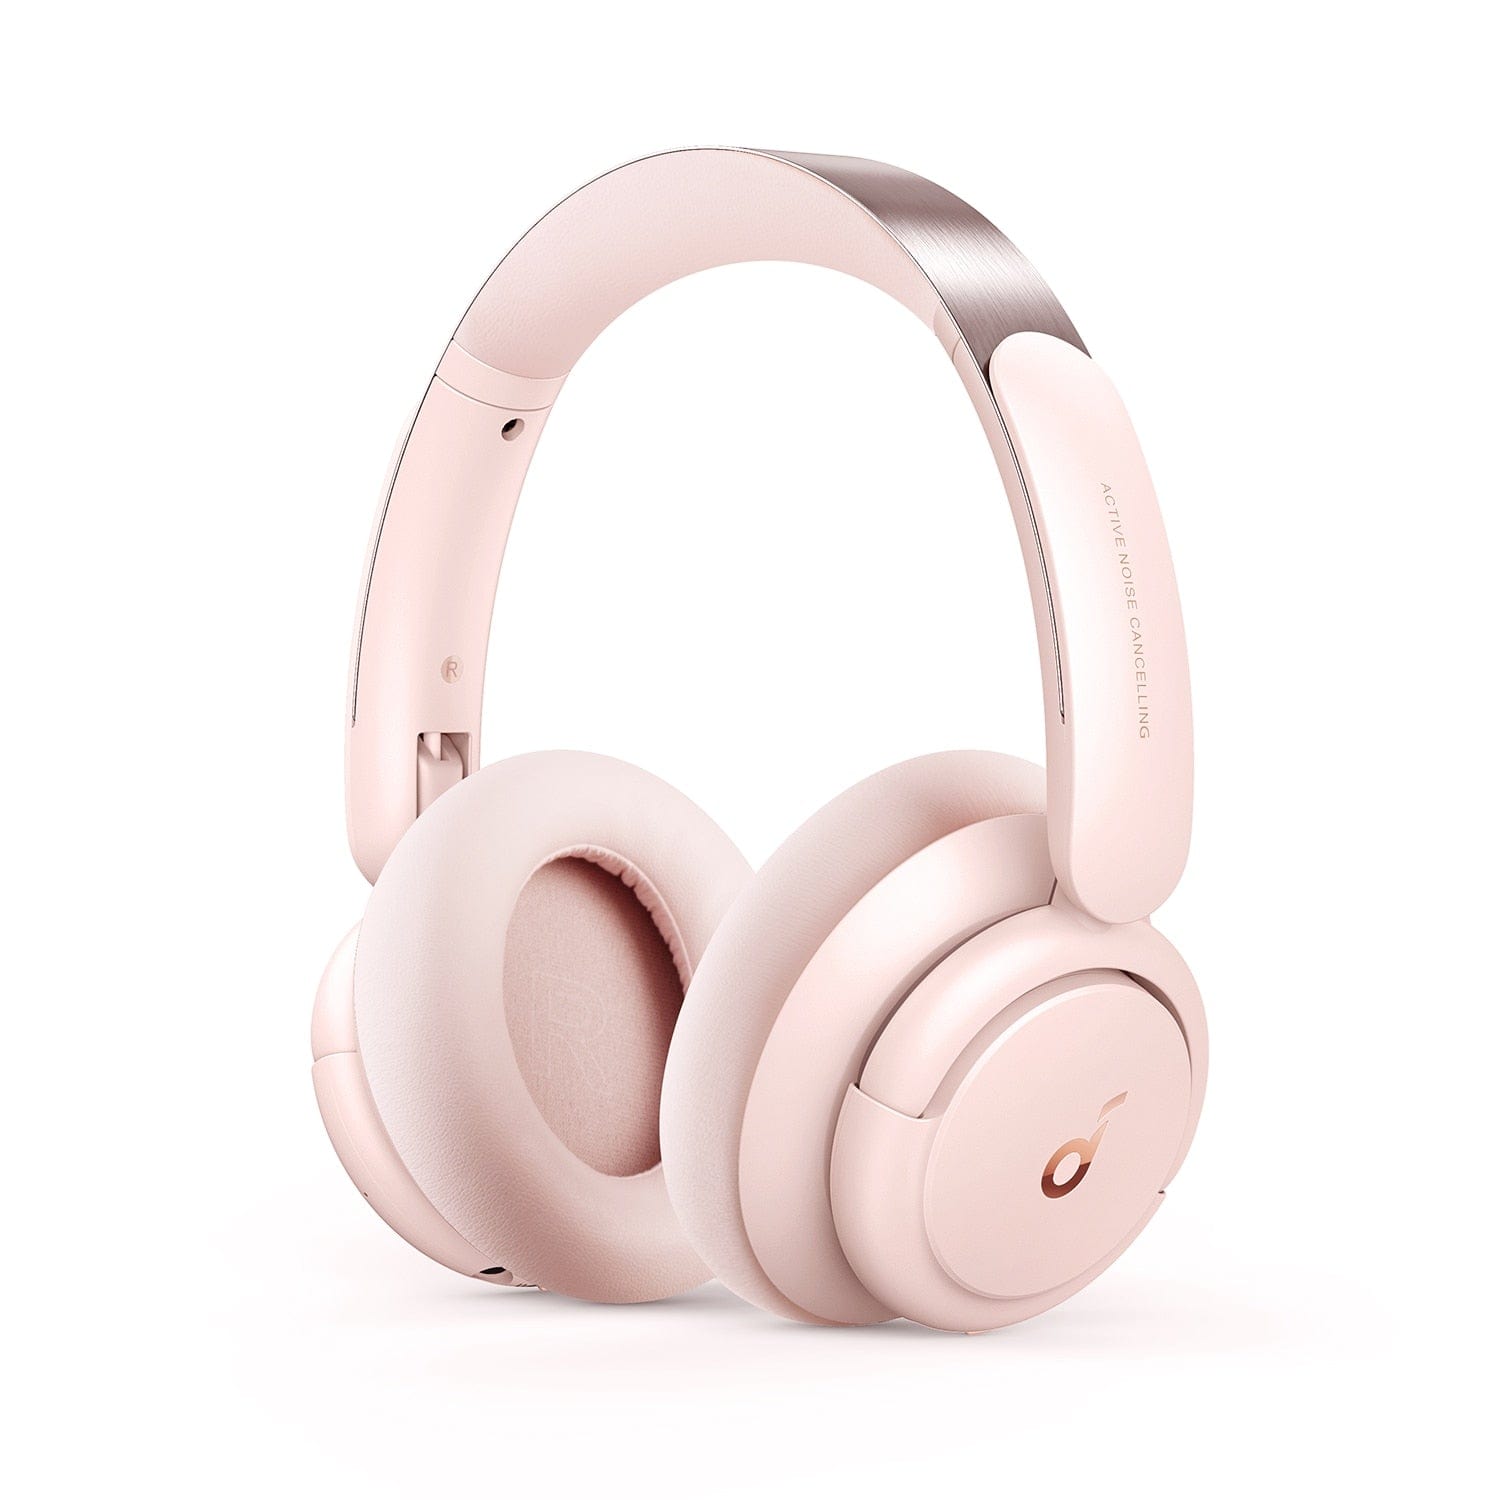 Soundcore Soundcore, Wireless Headphone, Version Life Q30, Supports Bluetooth 5.0, Playtime up to 40 Hours, Color Pink